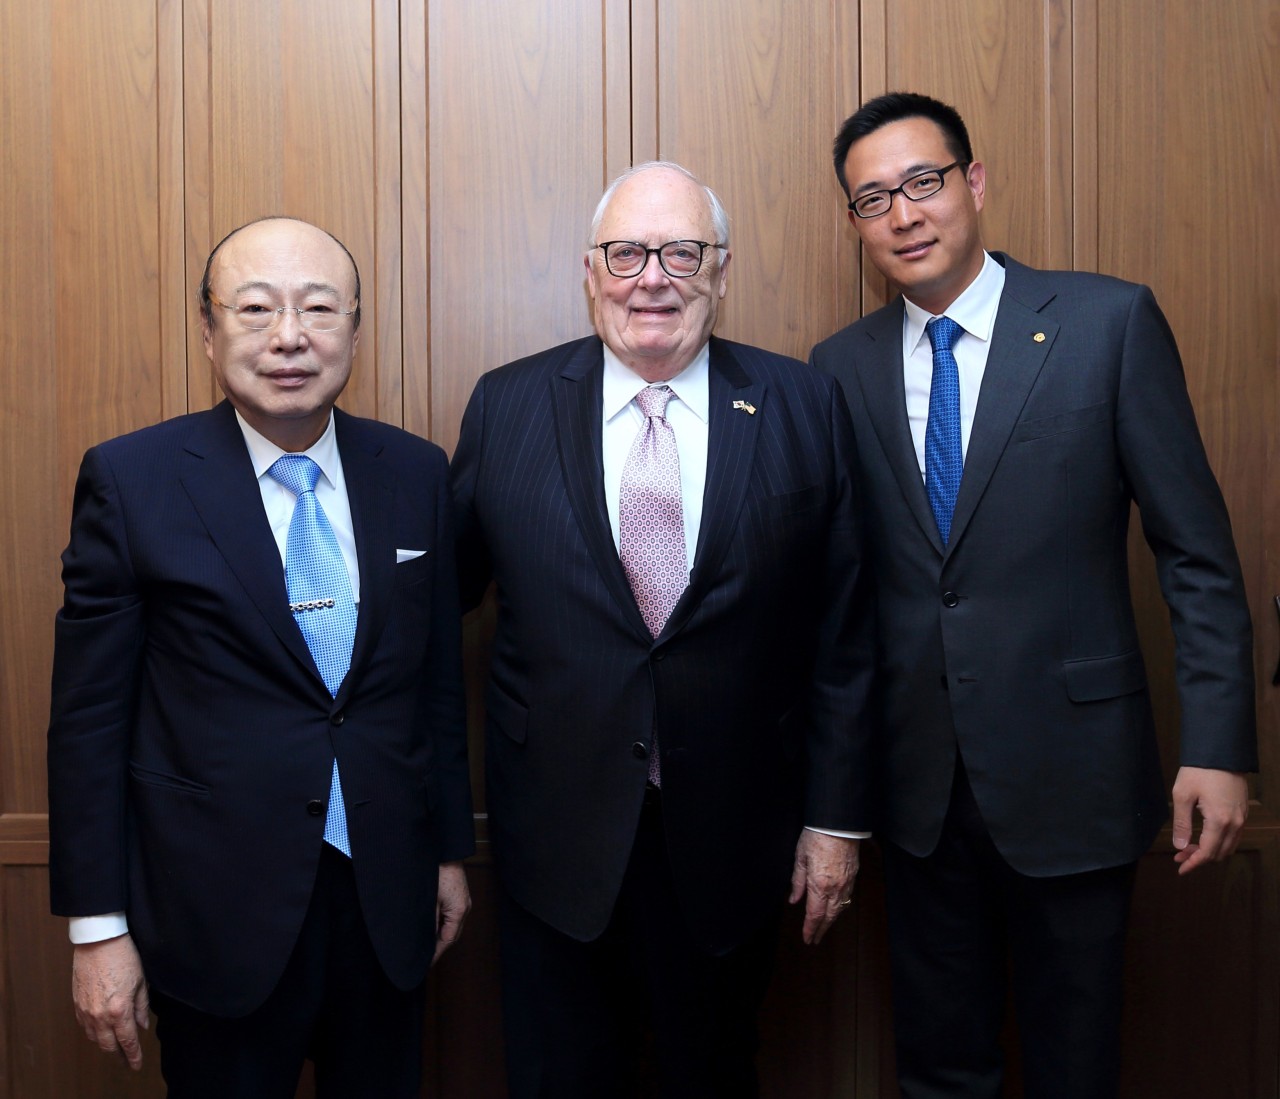 From left: Hanwha Group Chairman Kim Seung-youn, Heritage Foundation founder Edwin John Feulner and Hanwha Hotel and Resorts managing director Kim Dong-seon pose for a photo during a private dinner in Seoul on Wednesday. (Hanwha Group)